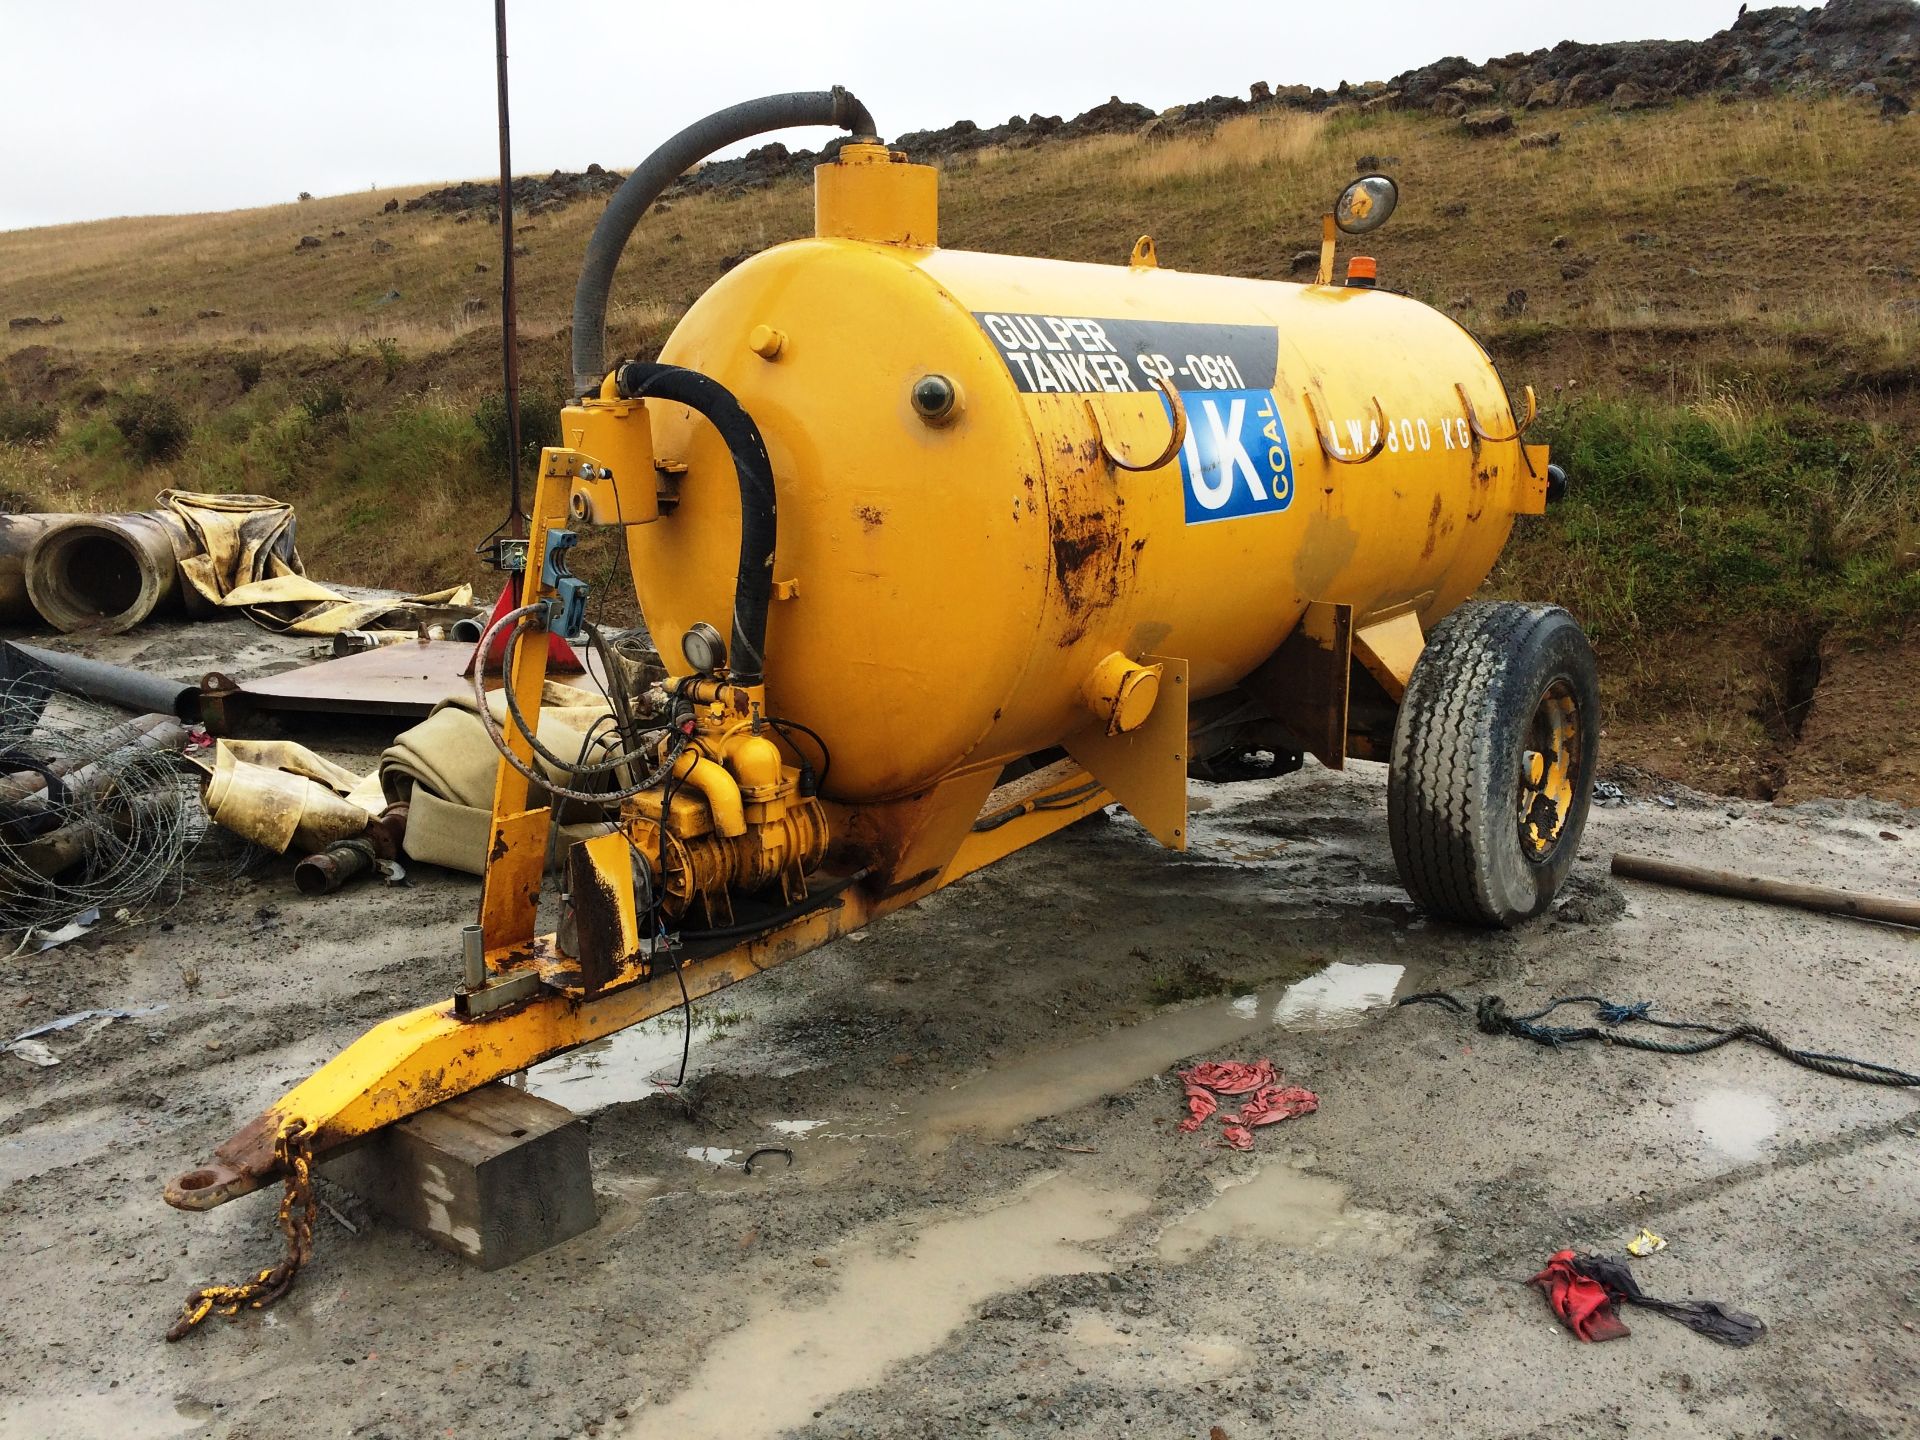 Single Axle Draw Bar Water Bowser, with hydraulic pump (plant no. SP0911) Situated At Potland Burn